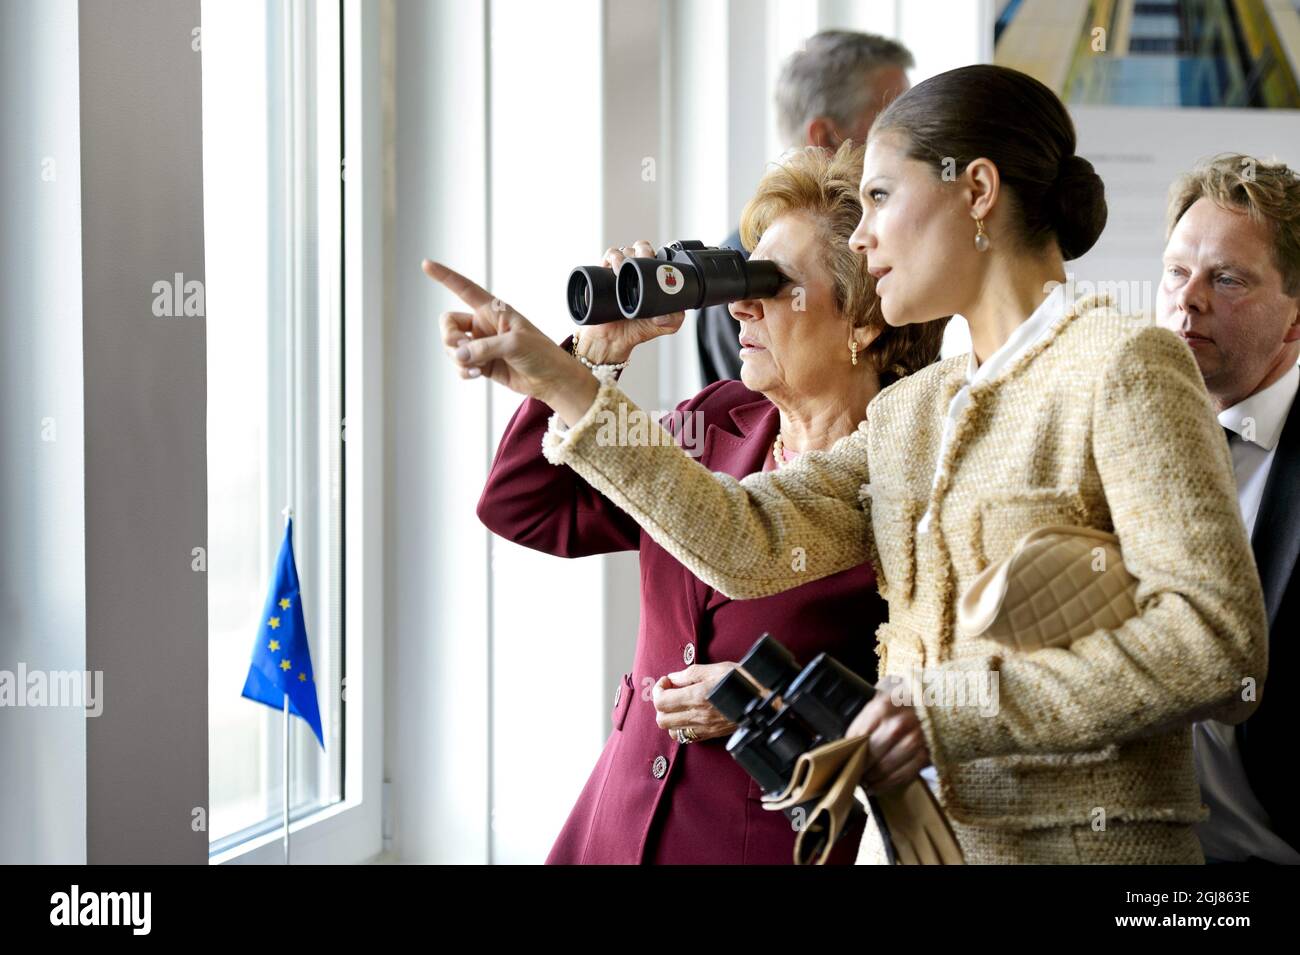 LUND 2013-10-03 Crown Princess Victoria seen poiting out landmarks for Maria Cavaco Silva during a visit to Ideon Gateway in Lund, Sweden, October 3, 2013. The Crown Princess couple accompanied President Anibal Cavaco Silva and his wife Maria. The Ideon Gateway is a model for building a city part designed for research and innovation. The President of Portugal is on a State visit to Sweden. Foto: Ludvig Thunman / TT / Kod 10600  Stock Photo